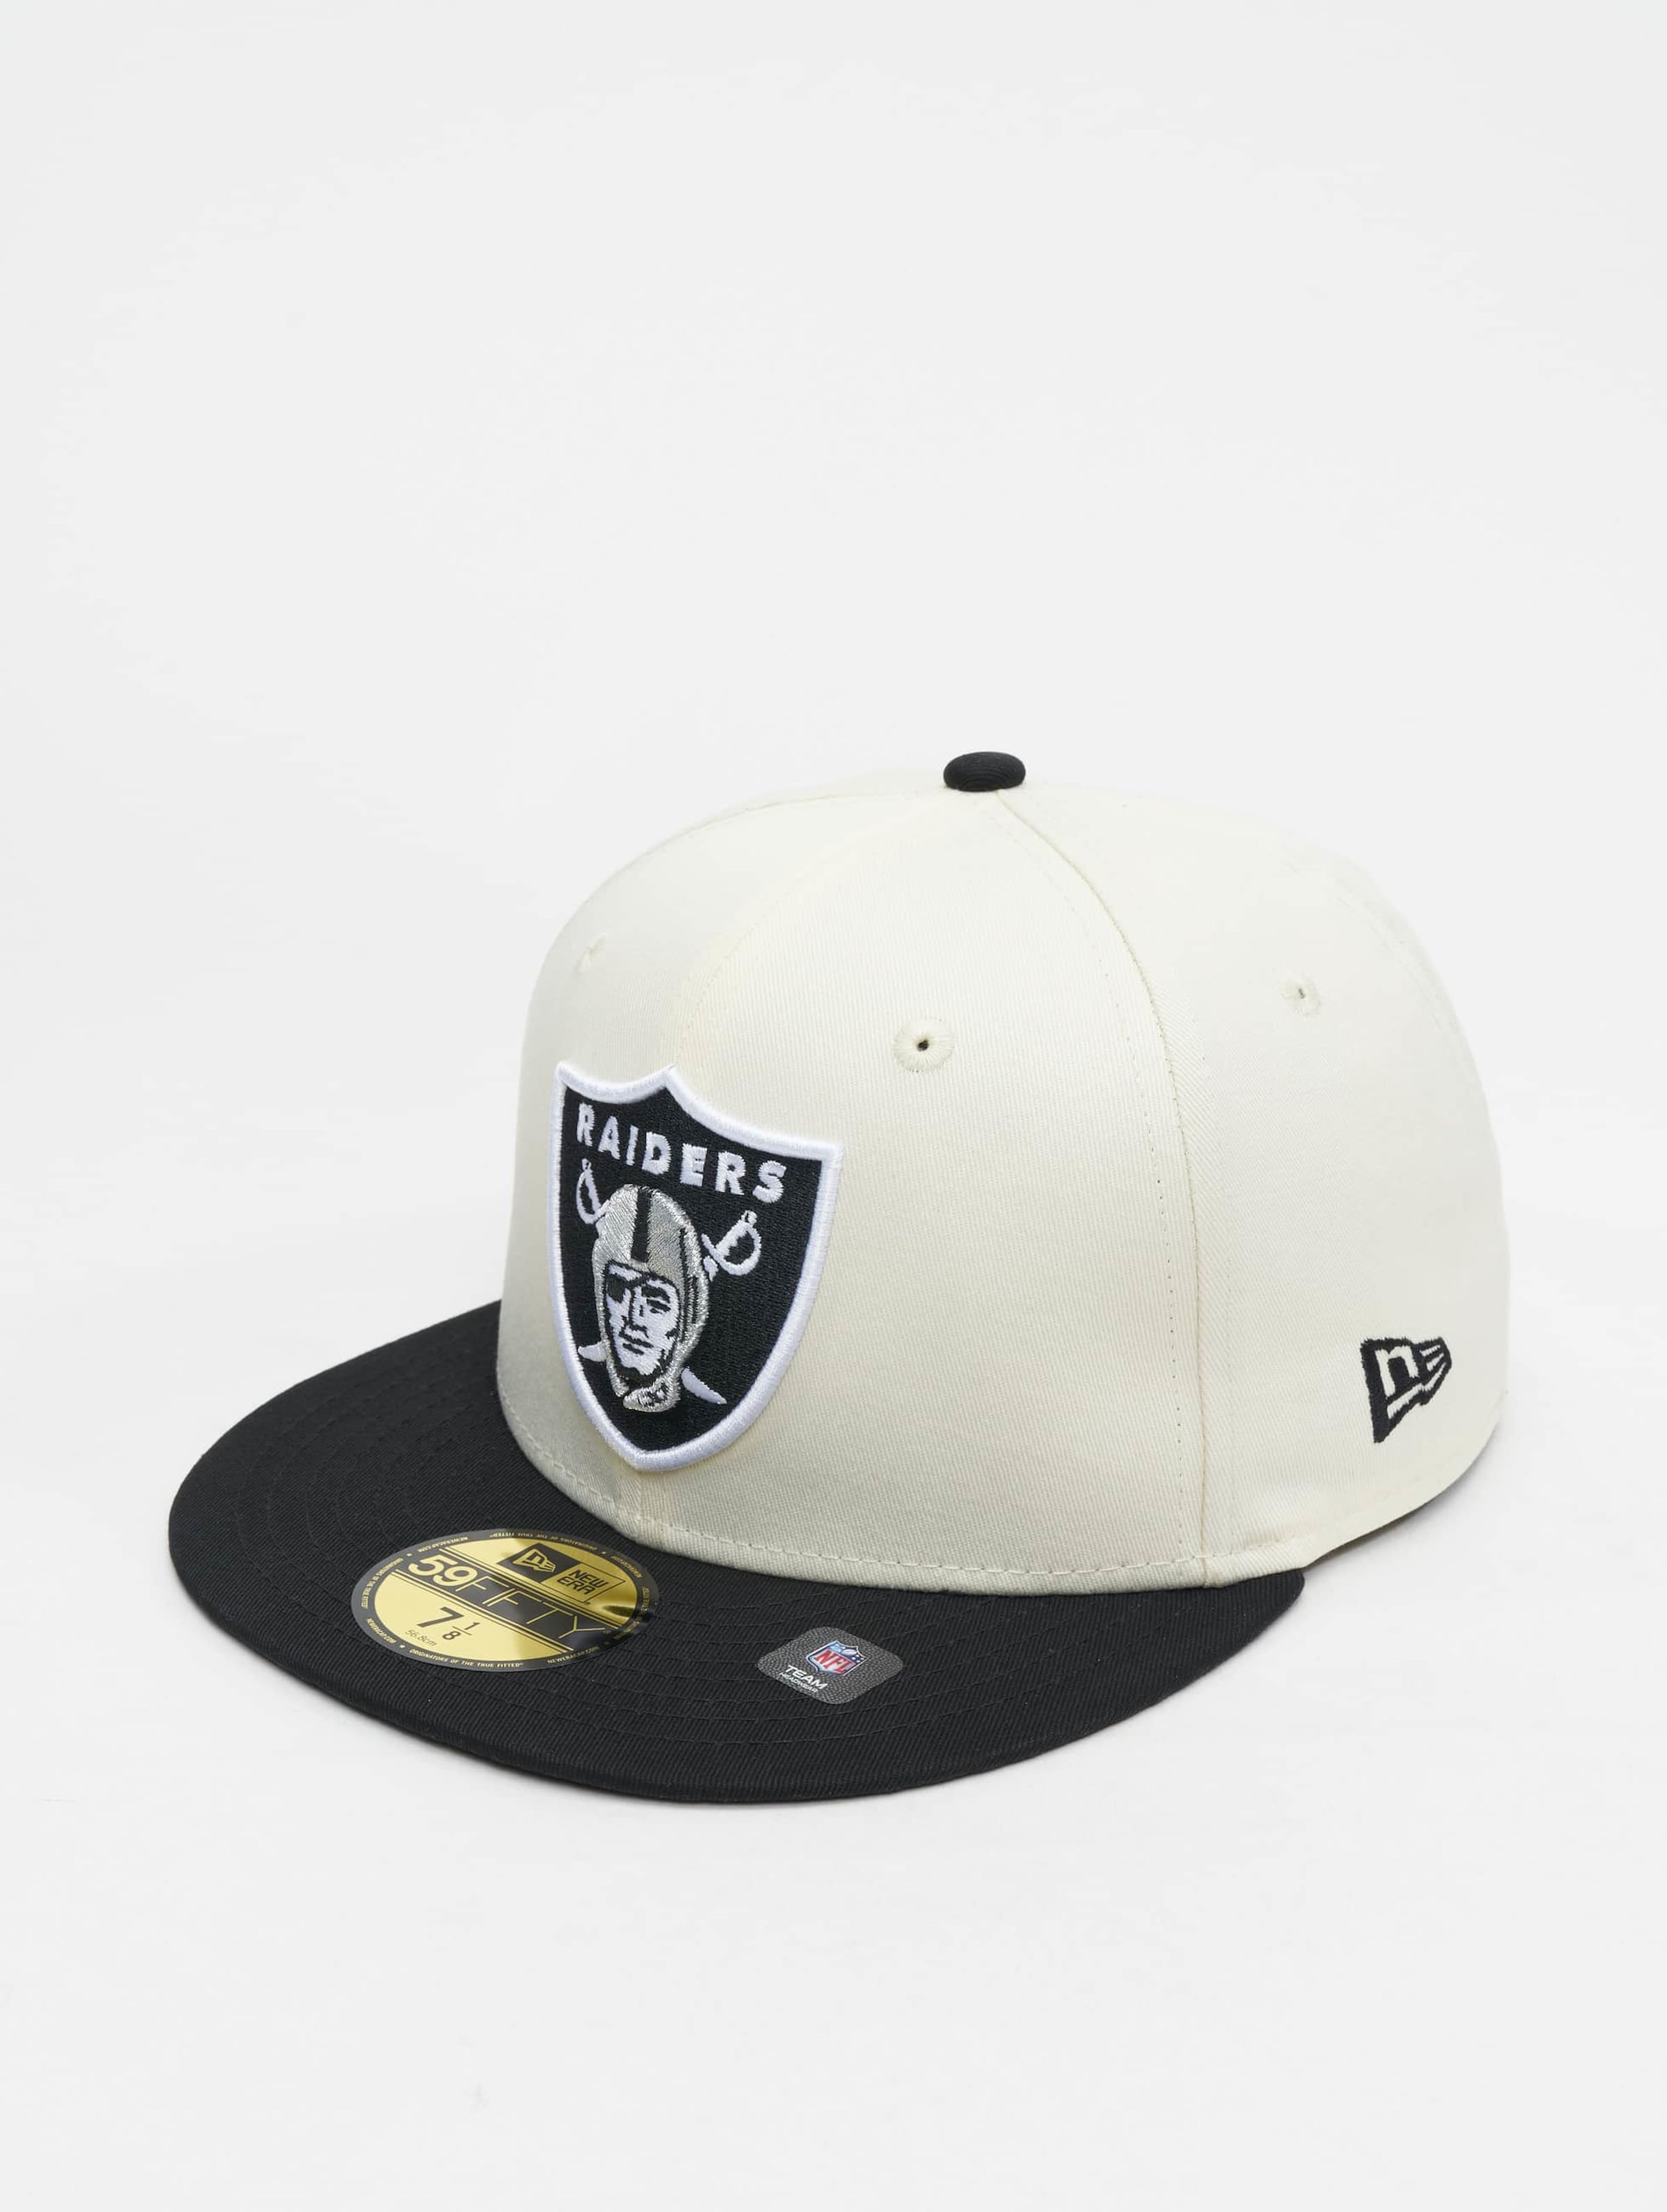 New Era Championships 59Fifty Las Vegas Raiders Fitted Cap